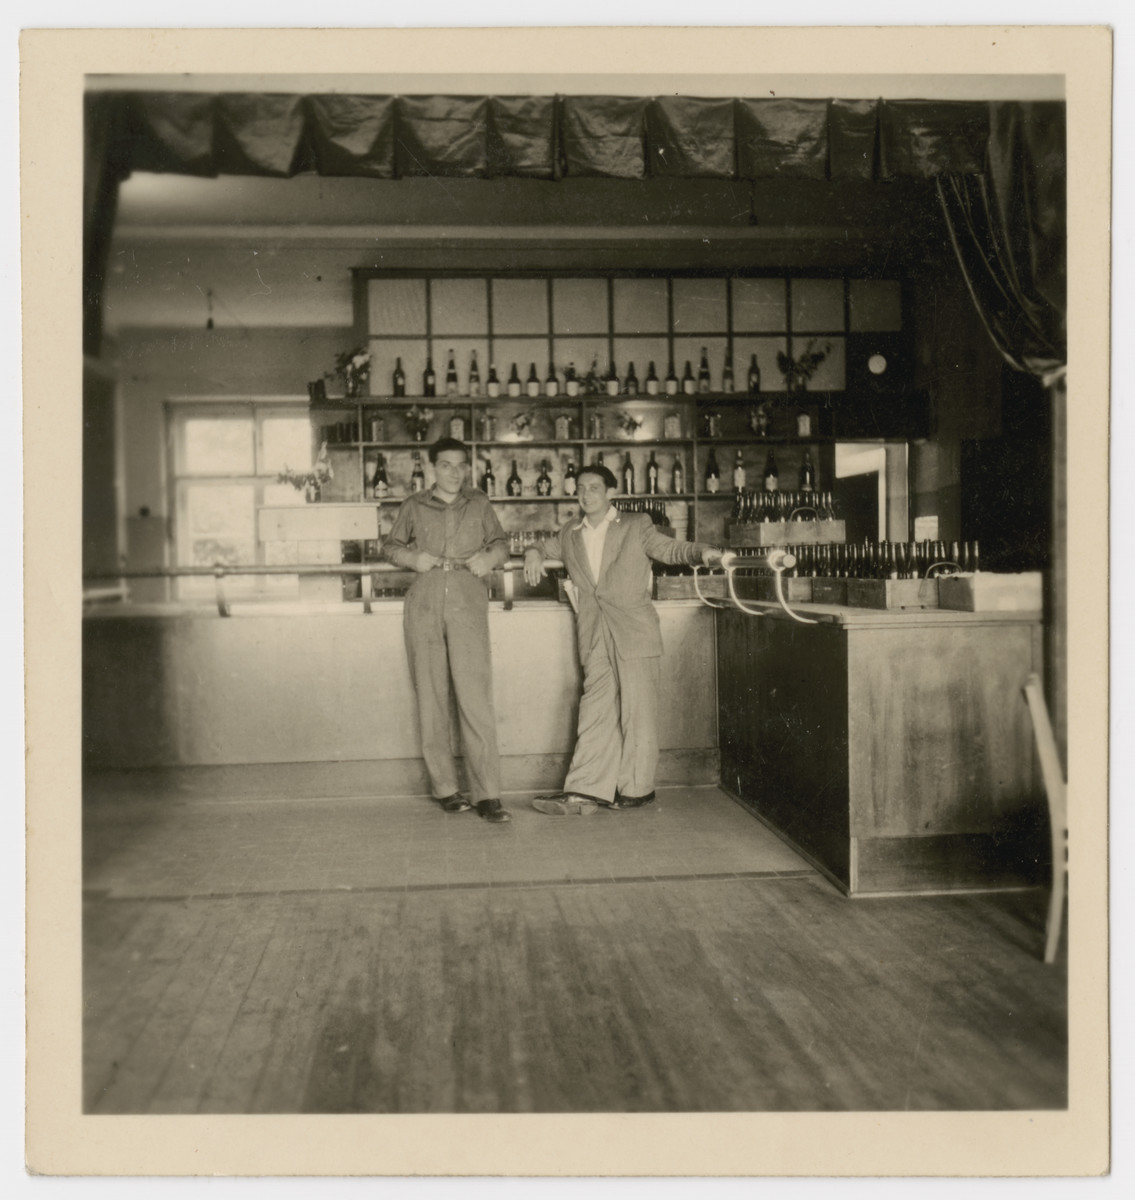 Two men pose by the bar in the Bergen-Belsen displaced persons camp.

The original caption reads: "Sam's Canteen."